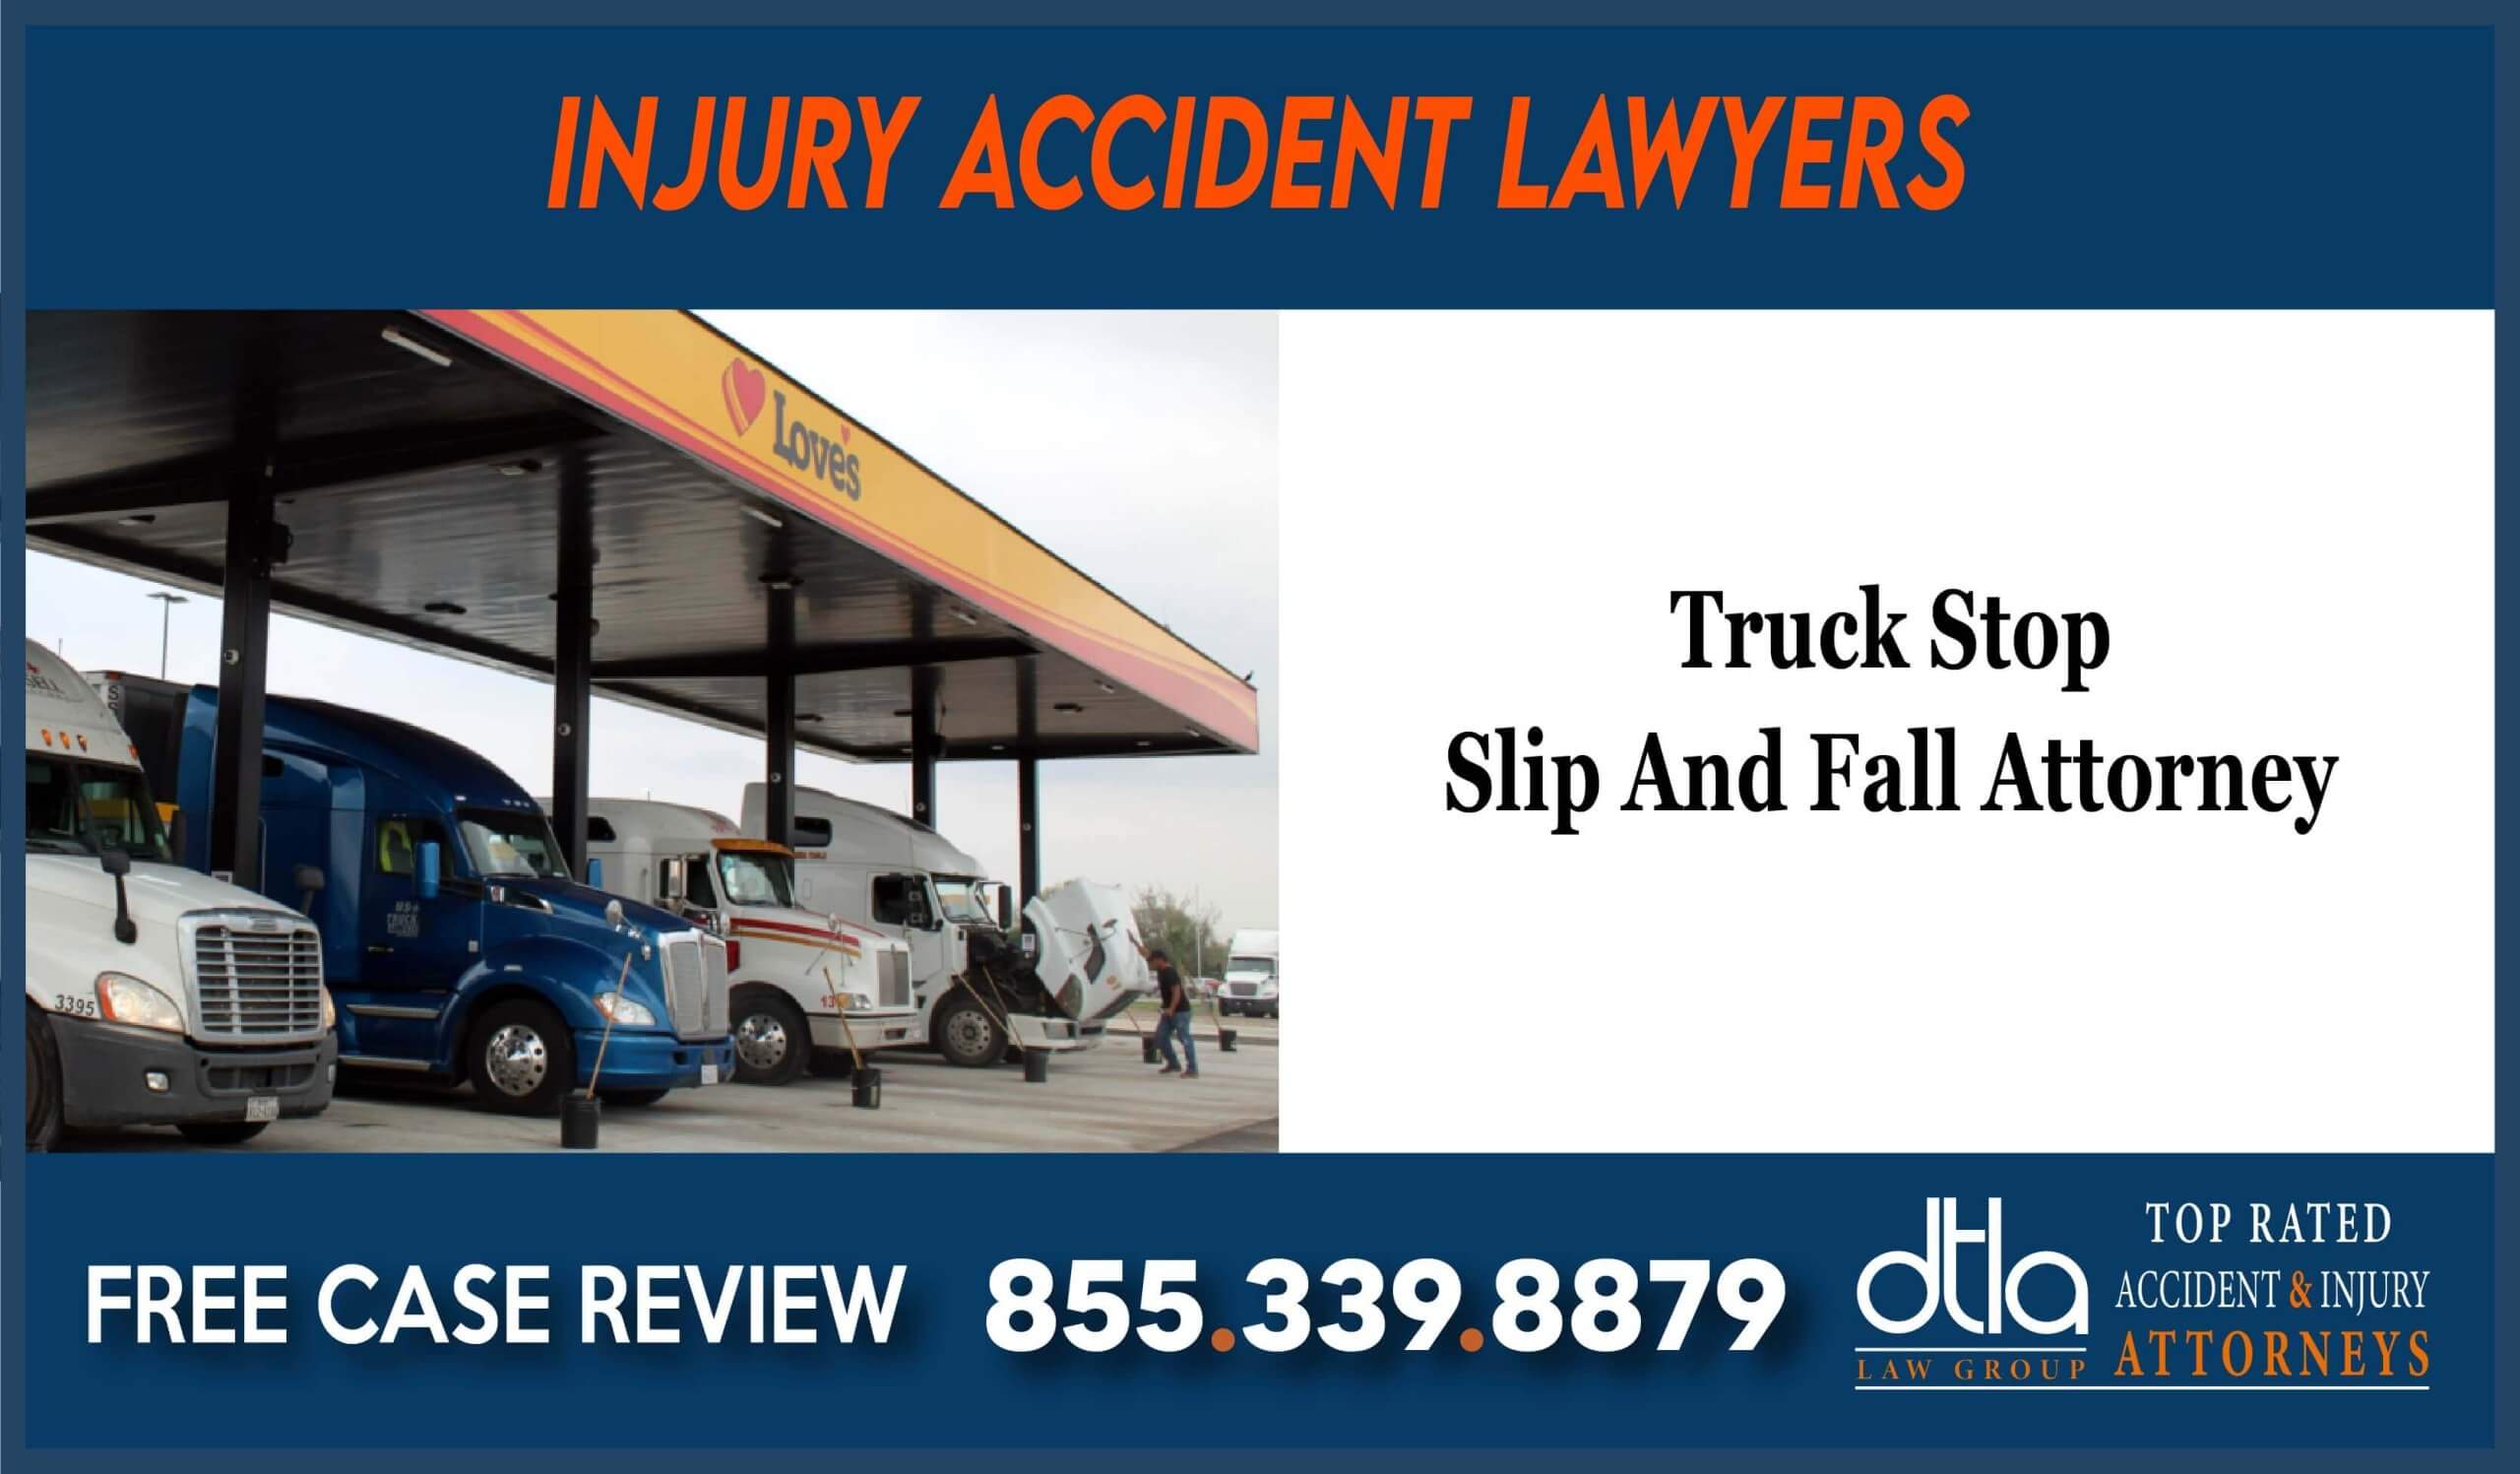 Truck Stop Slip And Fall Attorney liability incident accident sue compensation